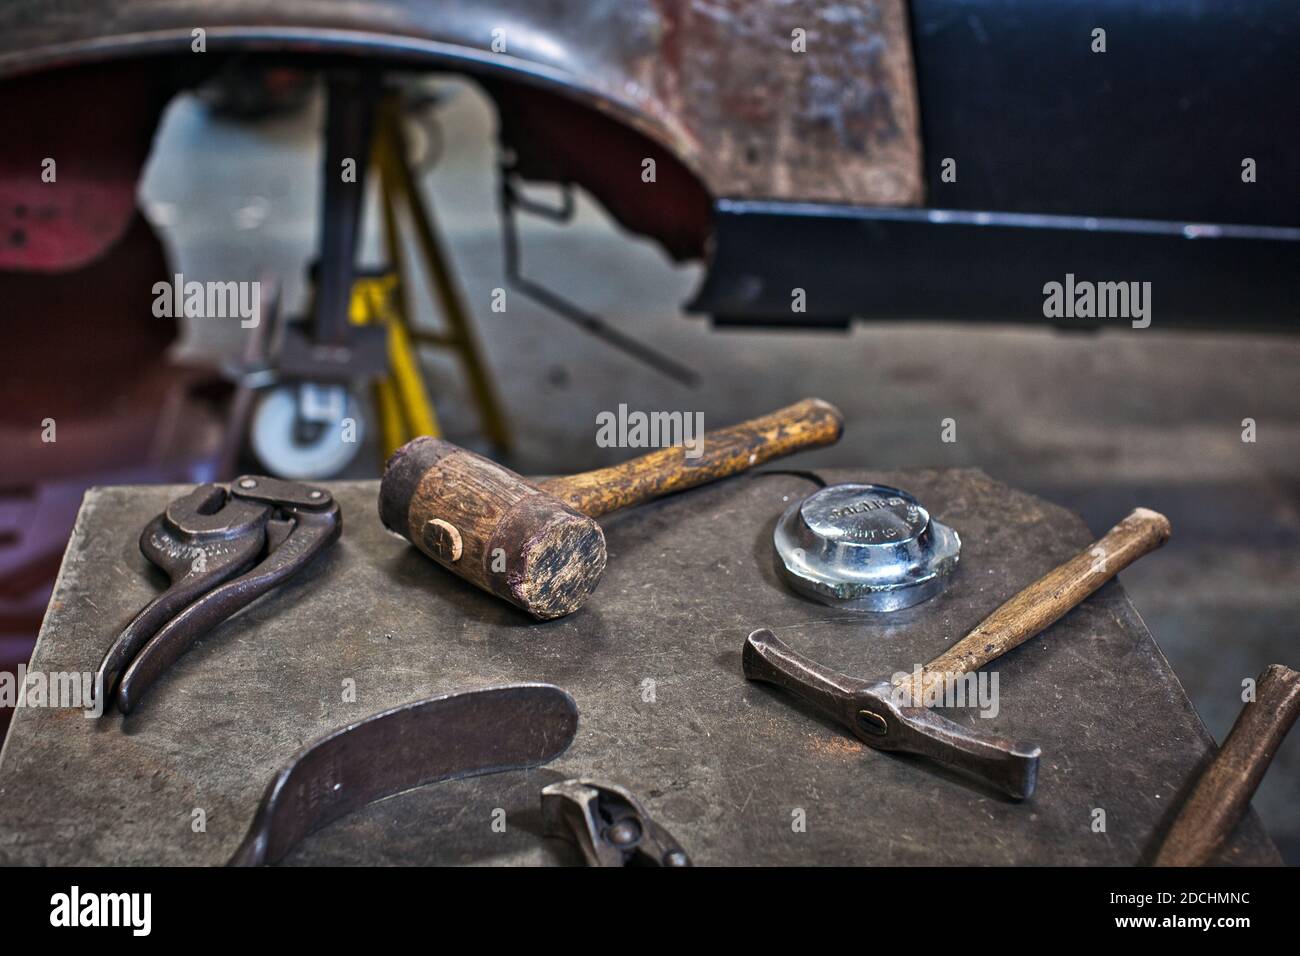 Work Tools On Table At Garage workshop. Stock Photo